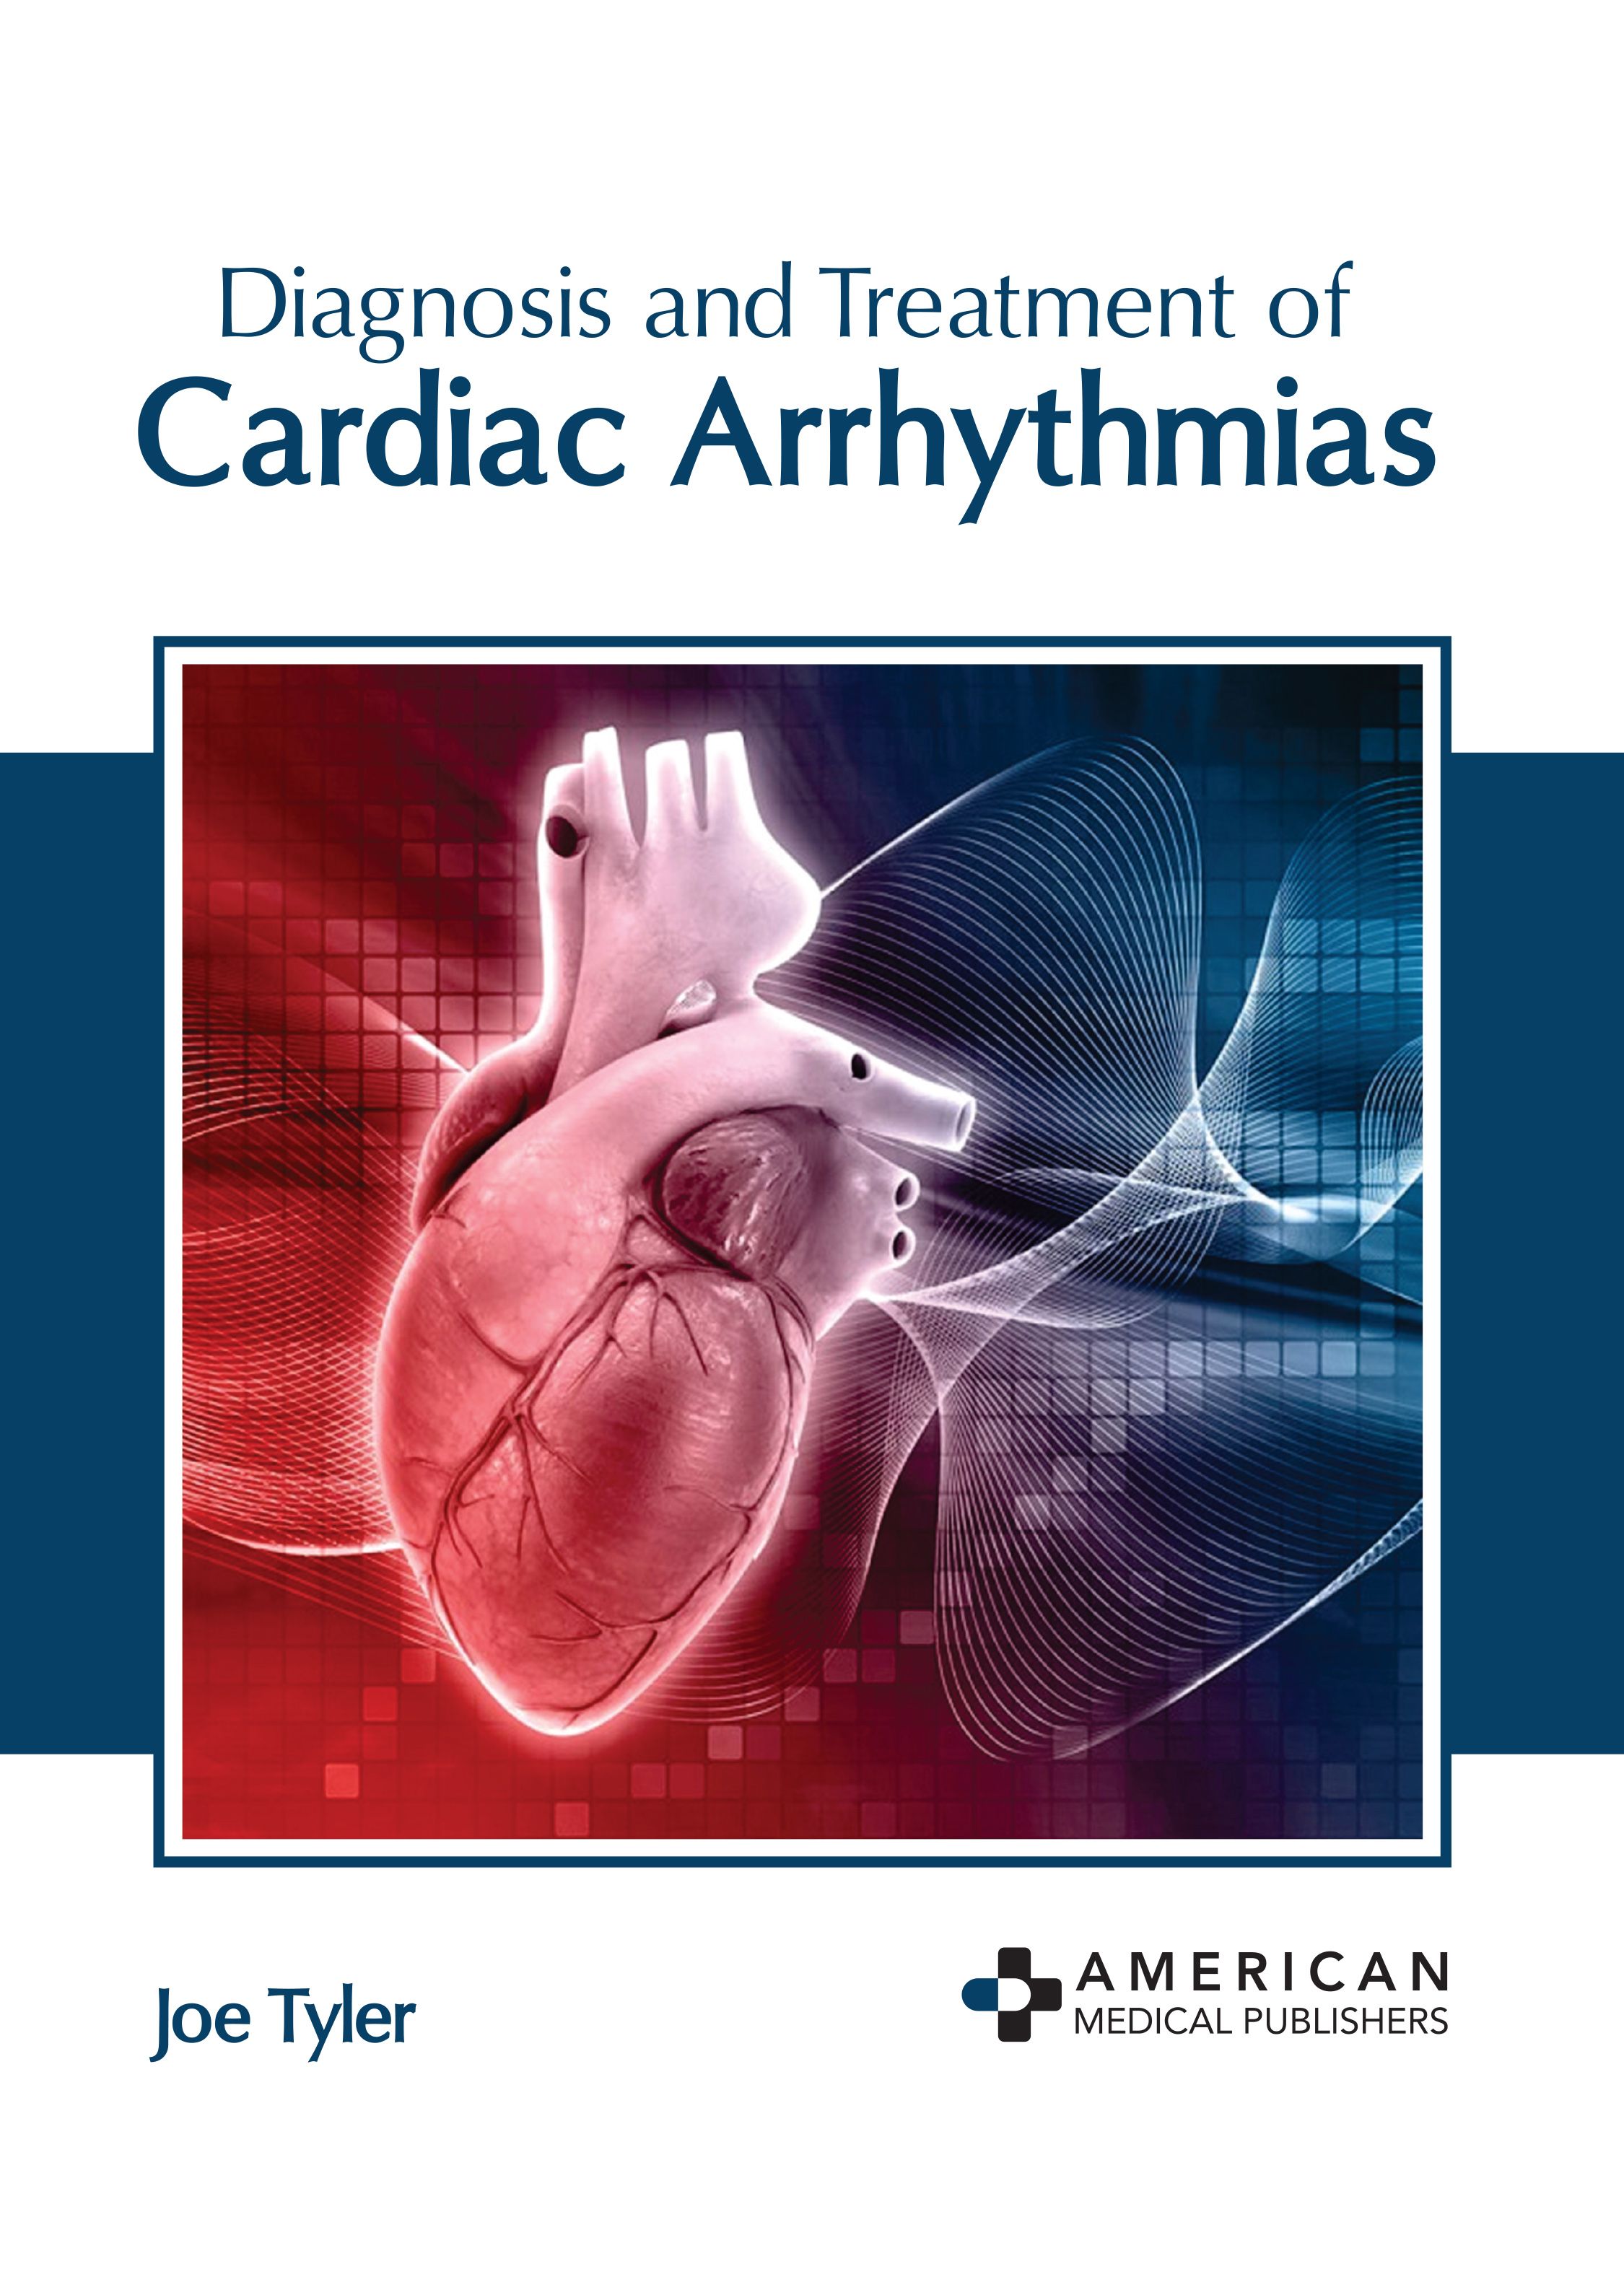 exclusive-publishers/american-medical-publishers/diagnosis-and-treatment-of-cardiac-arrhythmias-9798887400570